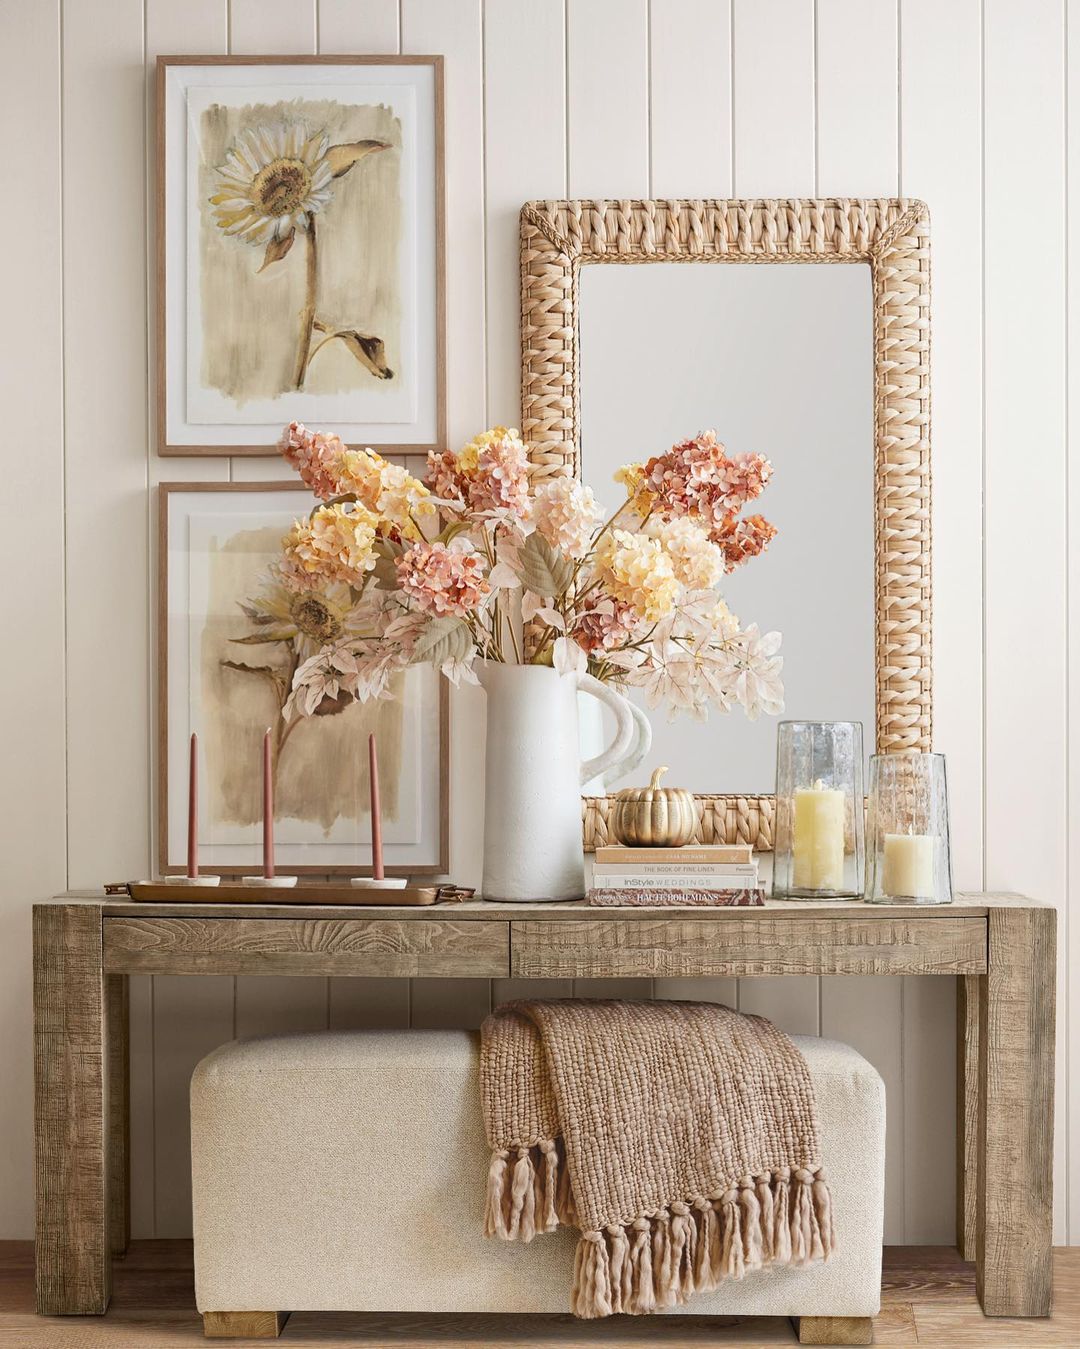 Pottery Barn home décor for thanksgiving. Beige accents, picture frame sand dried flowers.